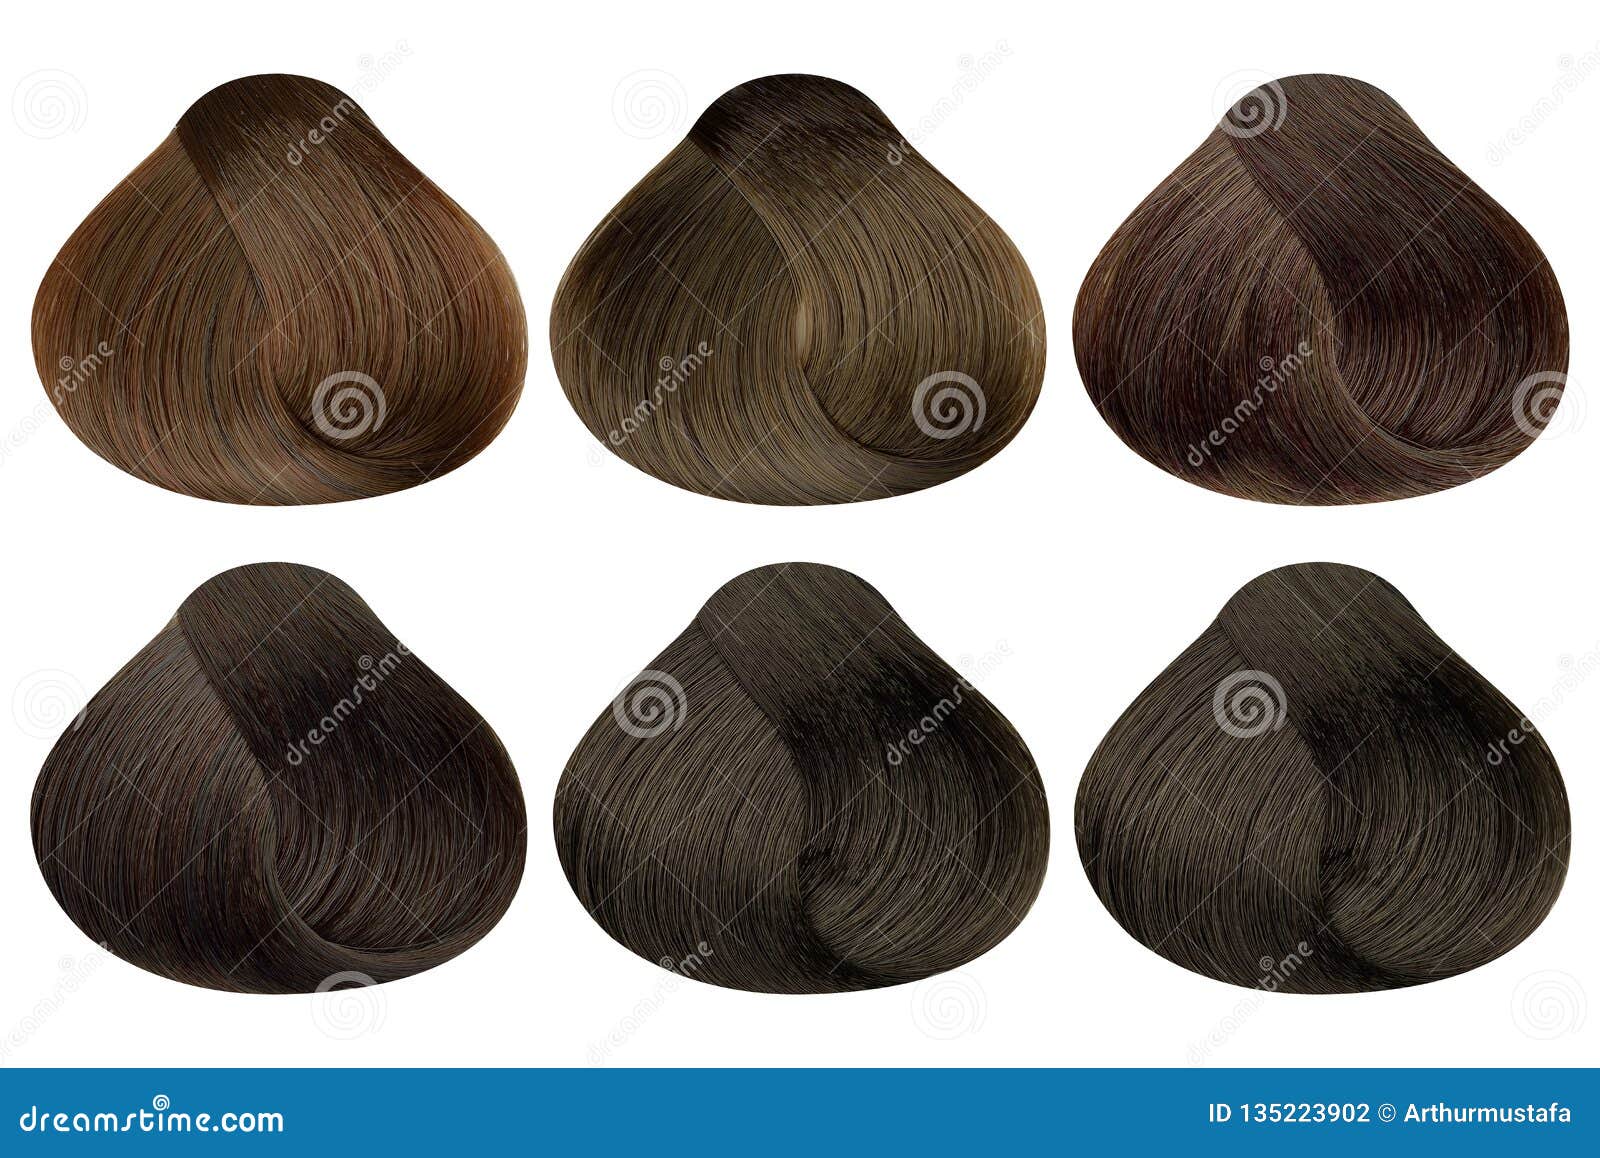 Set Of Locks Of Six Different Brown Hair Color Samples X28